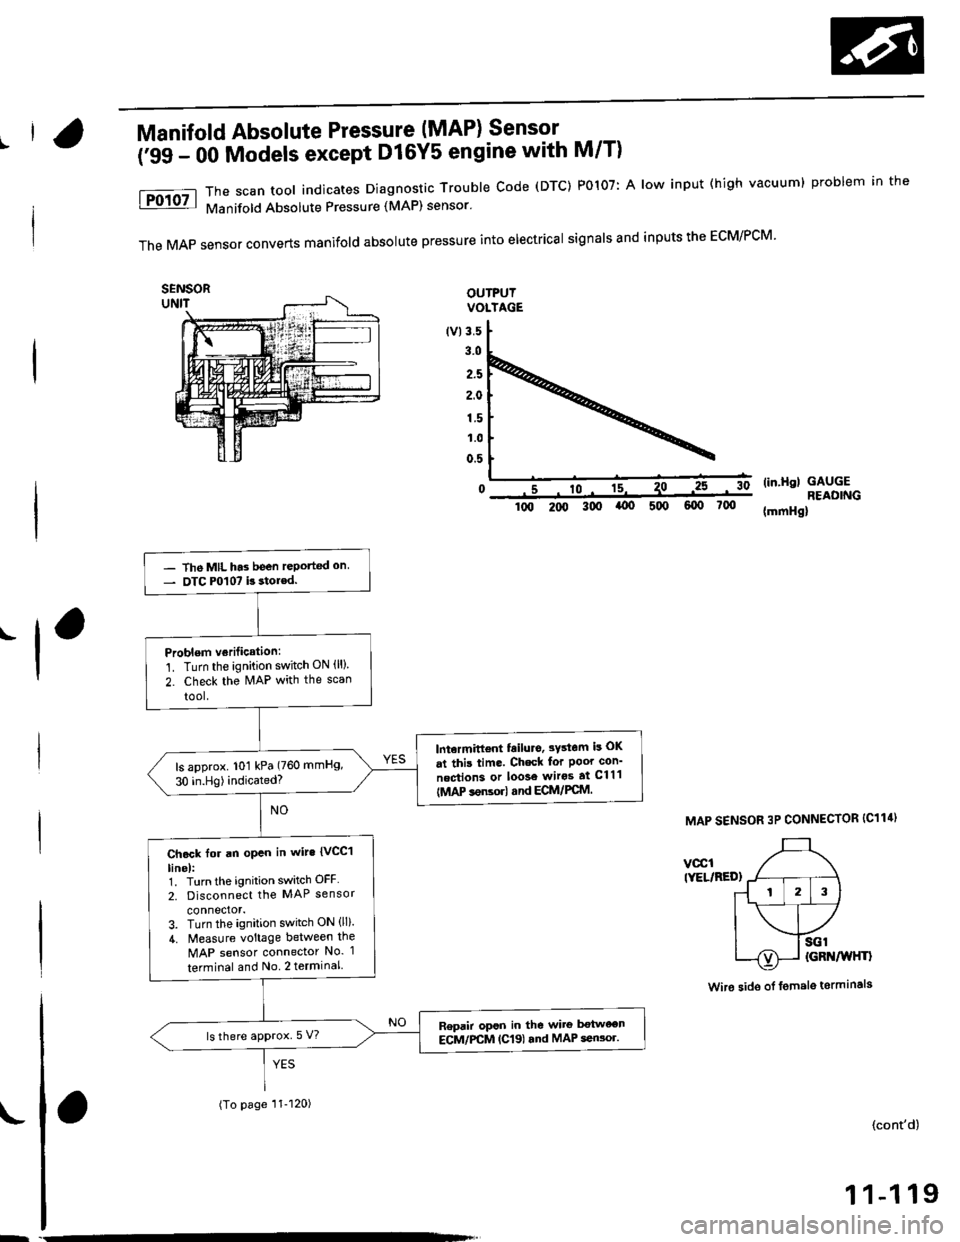 HONDA CIVIC 1998 6.G Workshop Manual |Manifold Absolute Pressure (MAP) Sensor
(;gg - OO Models except Dl6Y5 engine with M/T)
The scan tool indicates Diagnostrc Trouble Code (DTC) PO1O7: A low input (high vacuuml problem in the
Manifold 